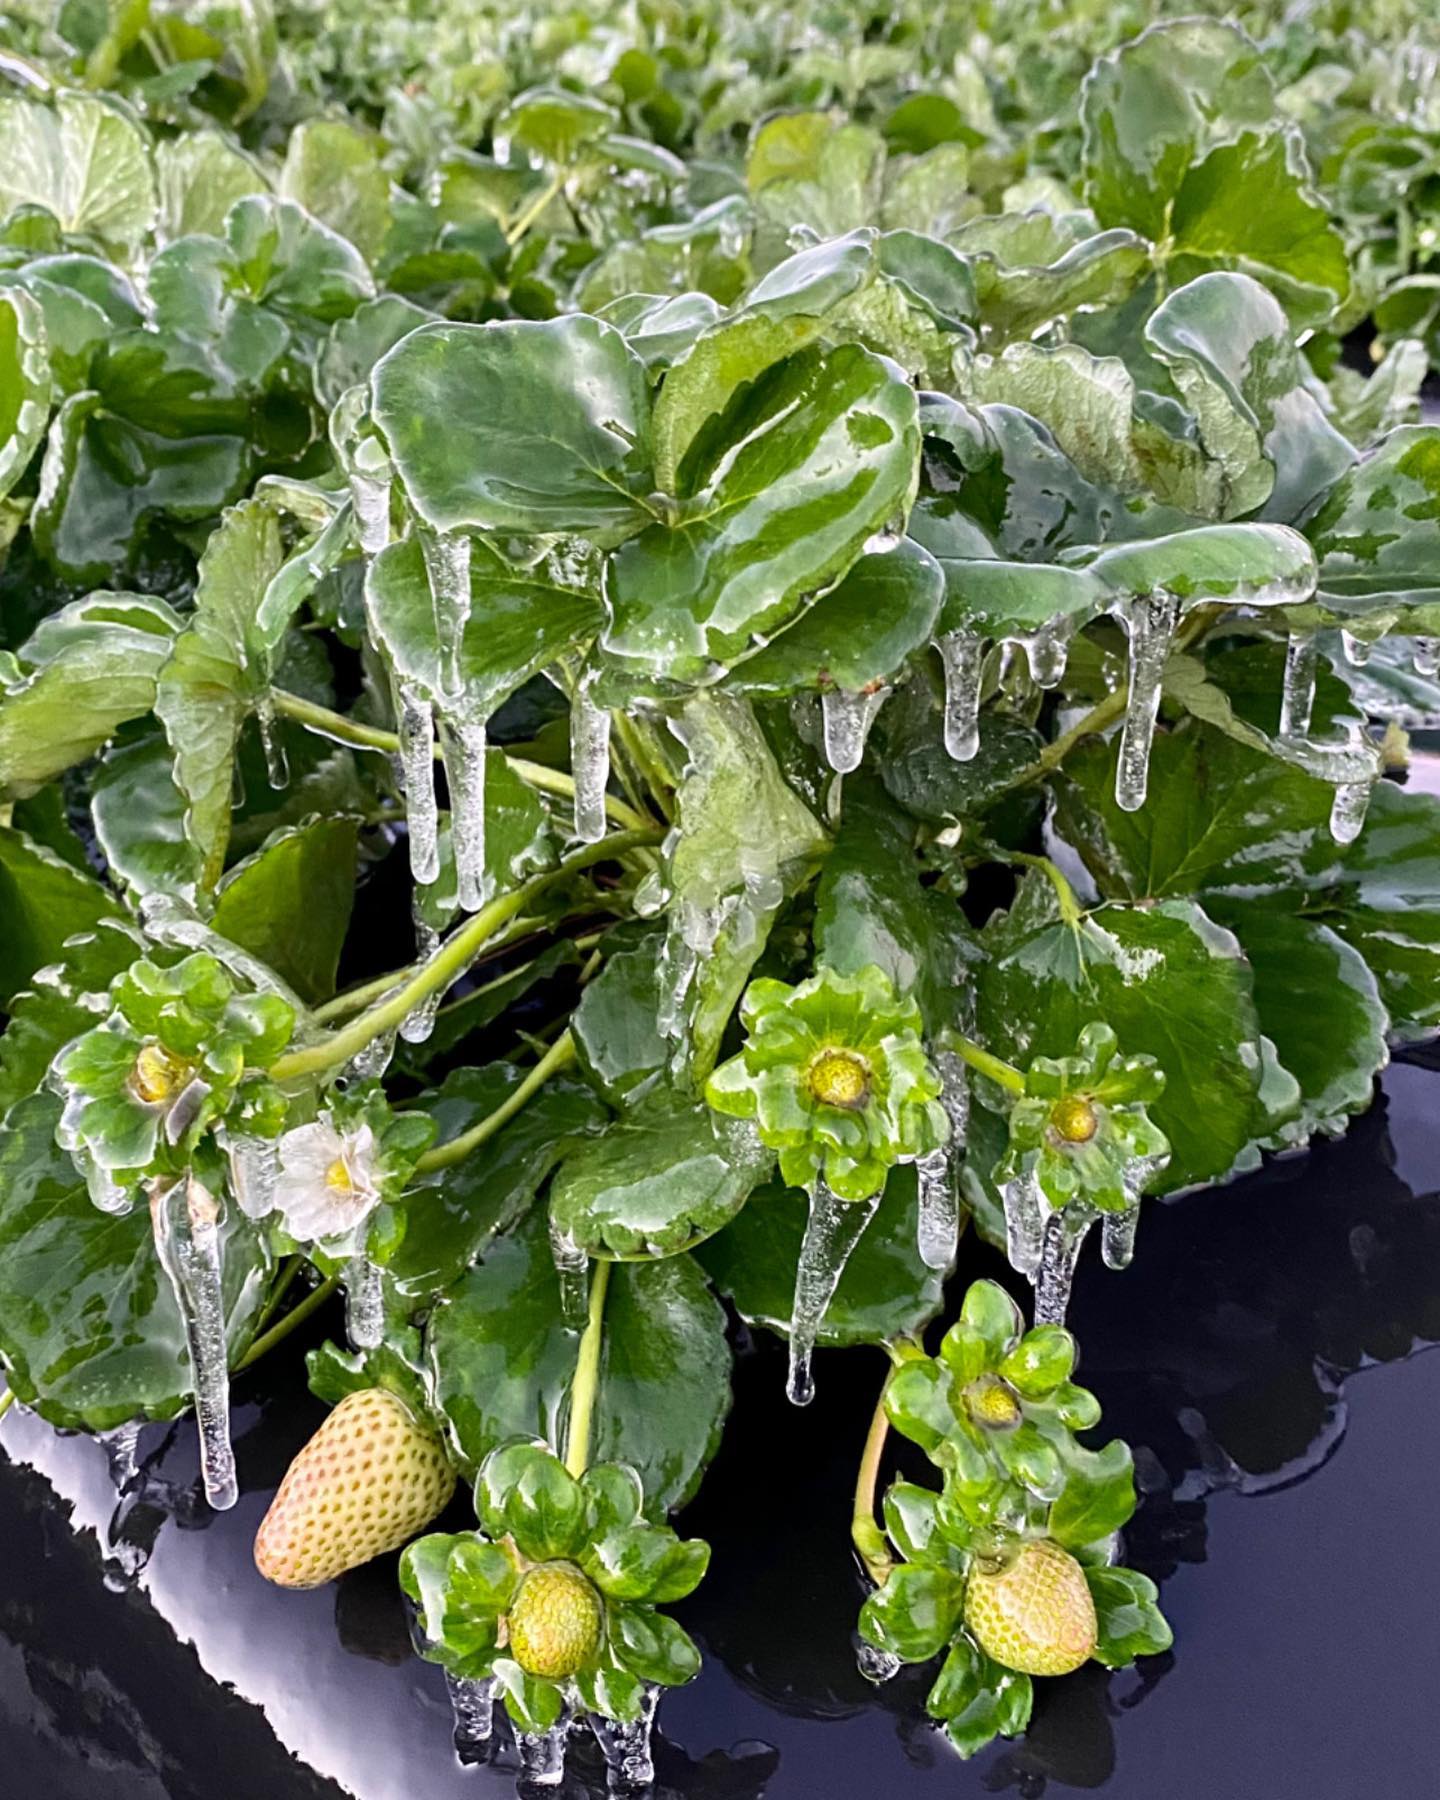 Featured image for “Freeze Effect: Legislation Introduced to Protect Growers”